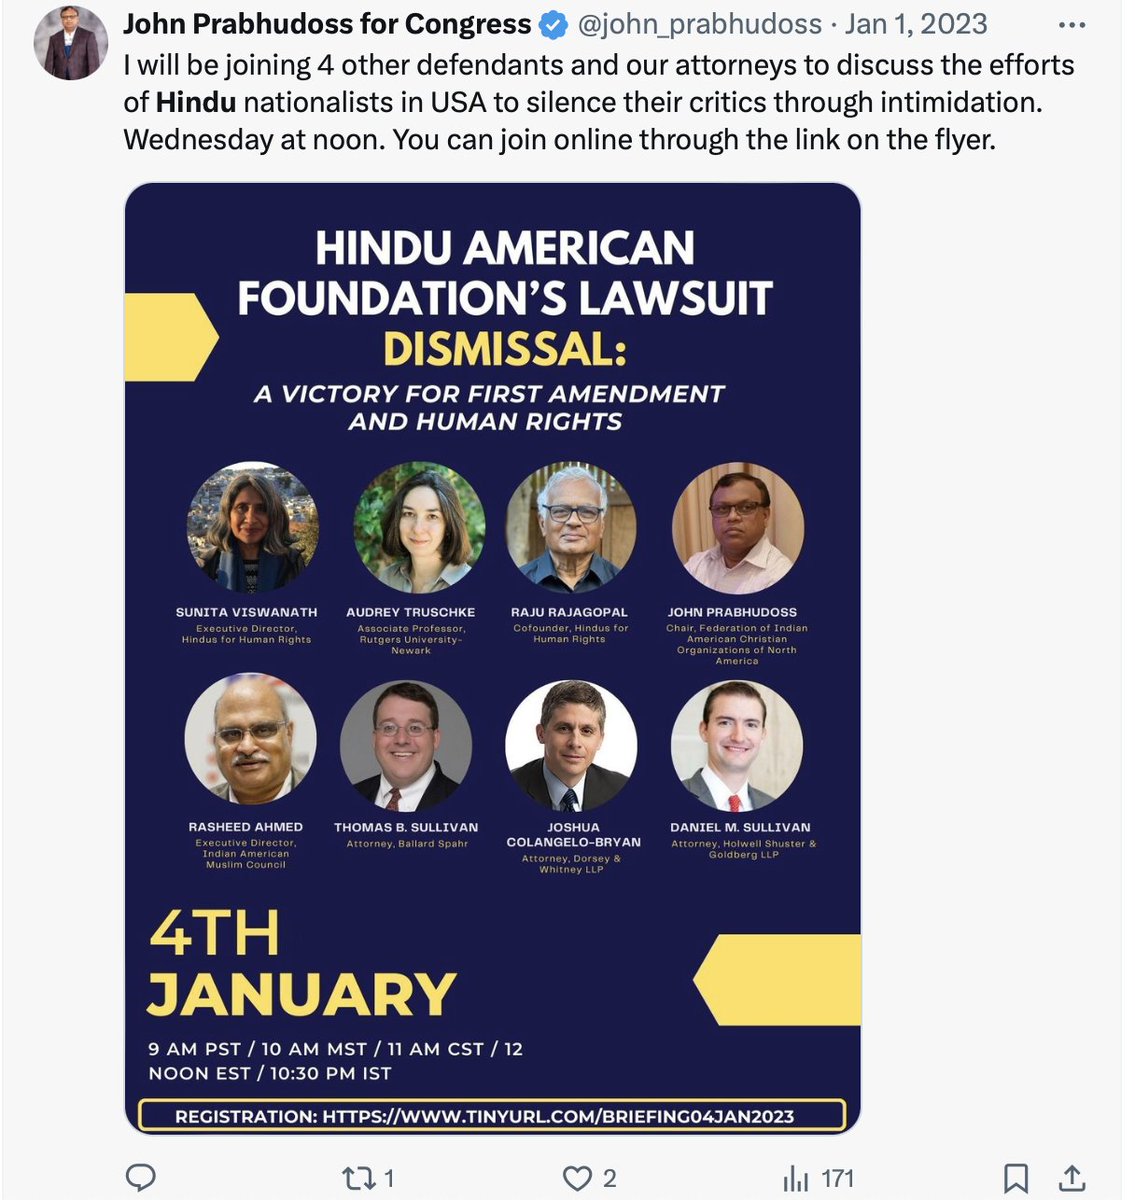 In 2002, John Prabhudoss with Republican Congressmen, Joe Pitts and Frank Wolf came to Gujarat. They were acompined by Raju Rajagopal co-founded Hindus for Human Rights with Sunita Viswanath. 5/5